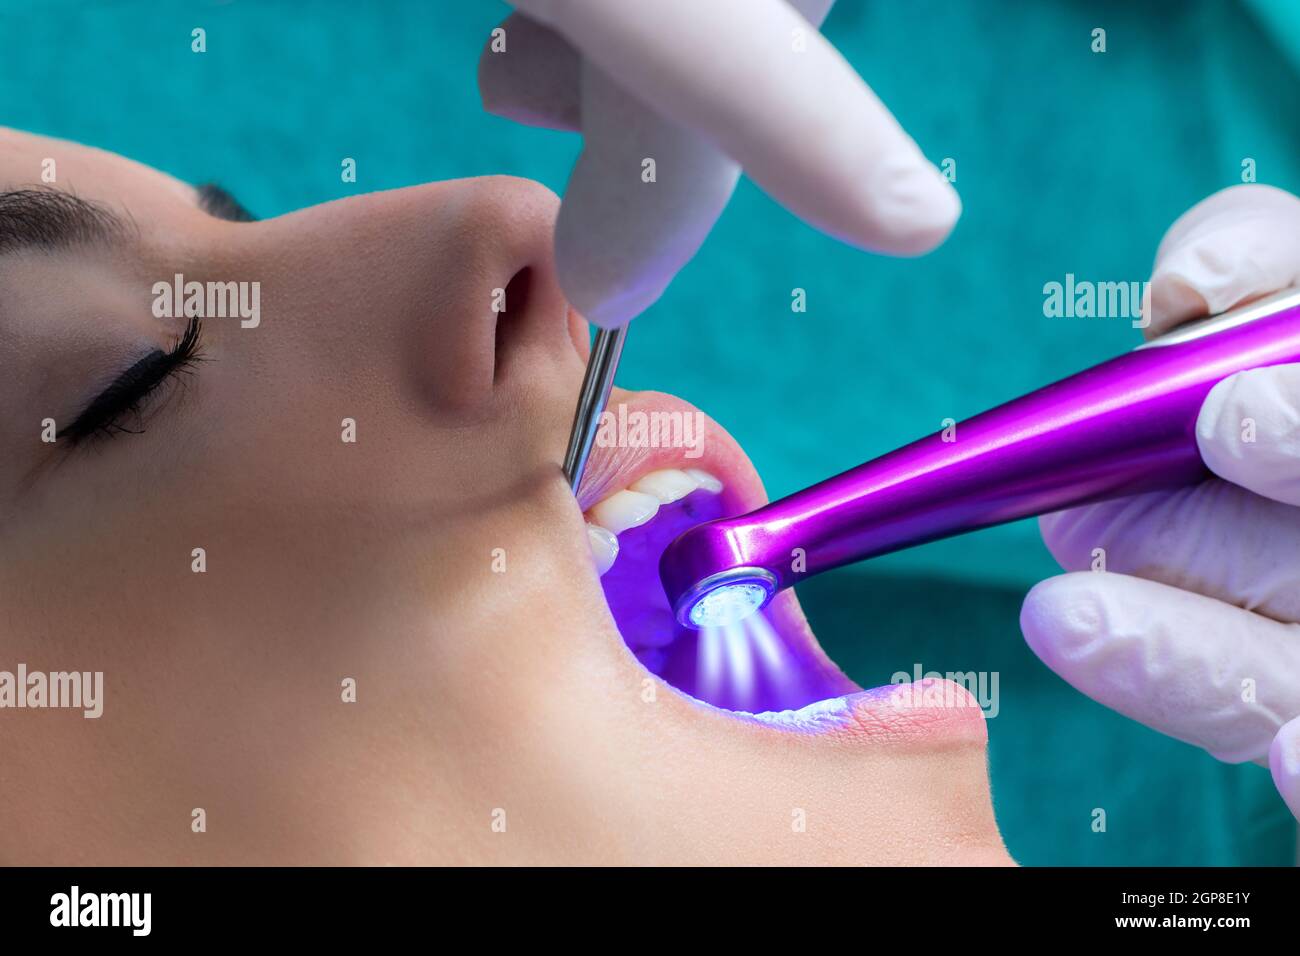 Macro close up of hand working on female teeth with blue led curing light. Stock Photo